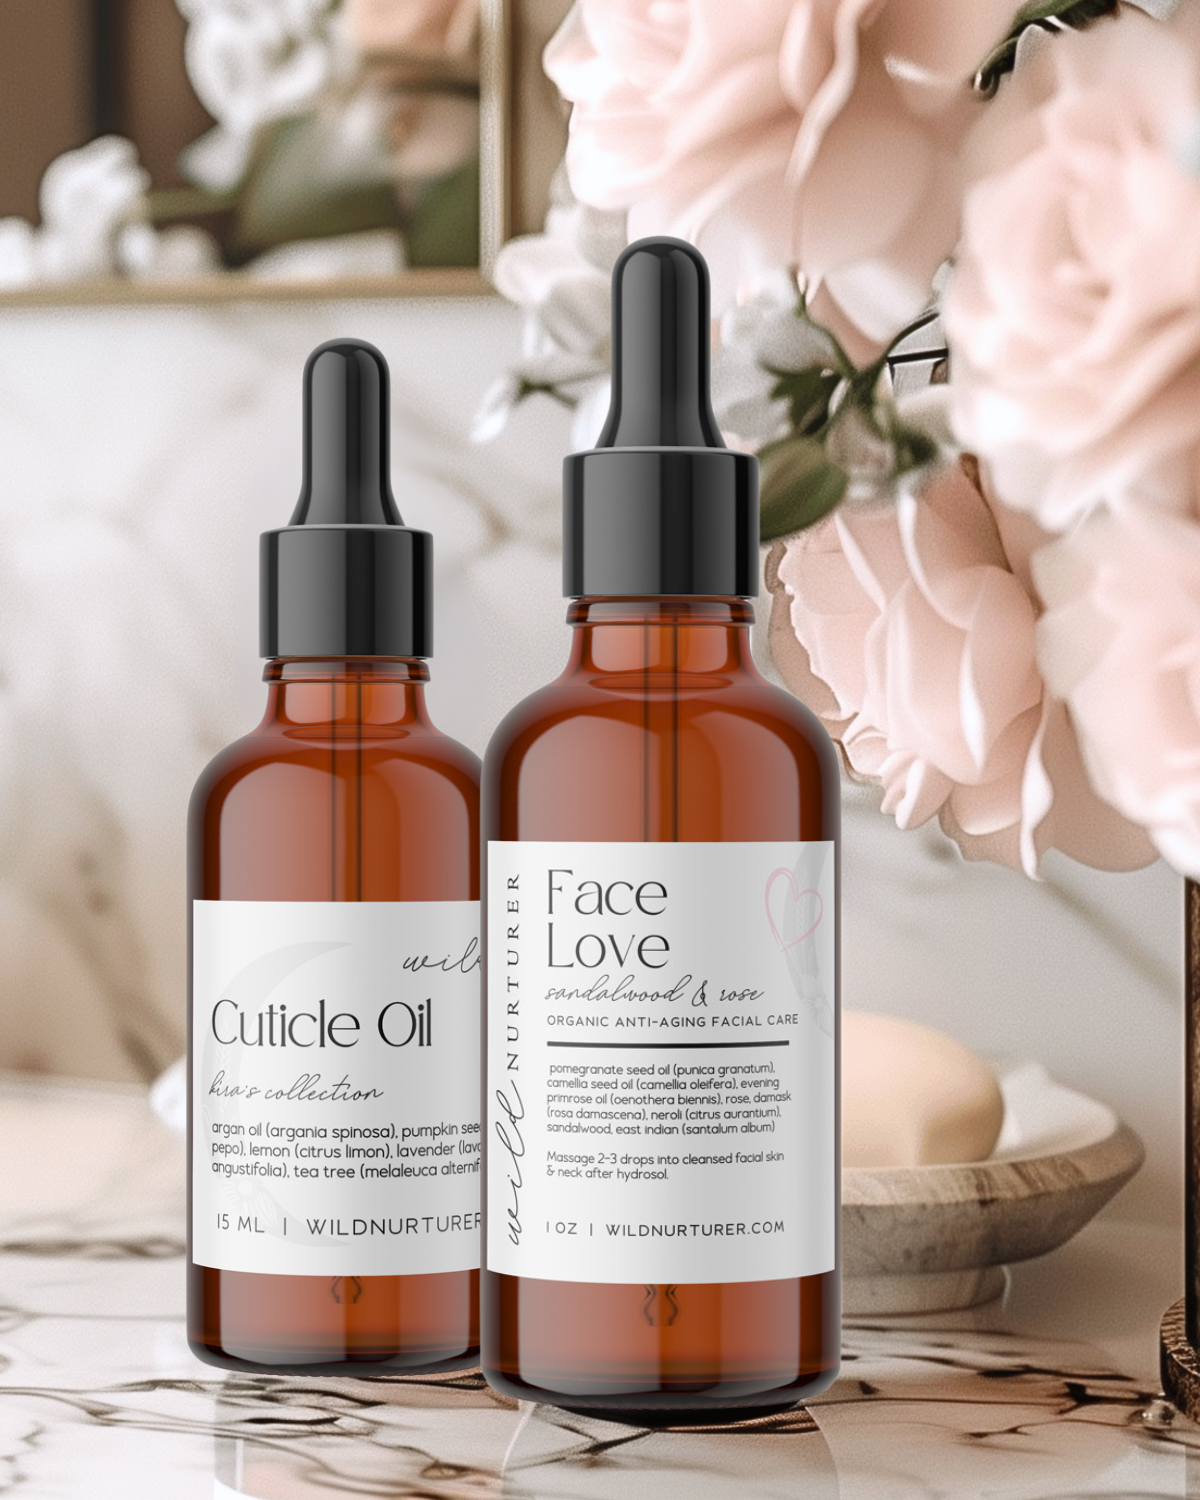 Two bottles of skincare oils labeled "cuticle oil" and "face love" on a bathroom counter with decorative flowers and accessories.